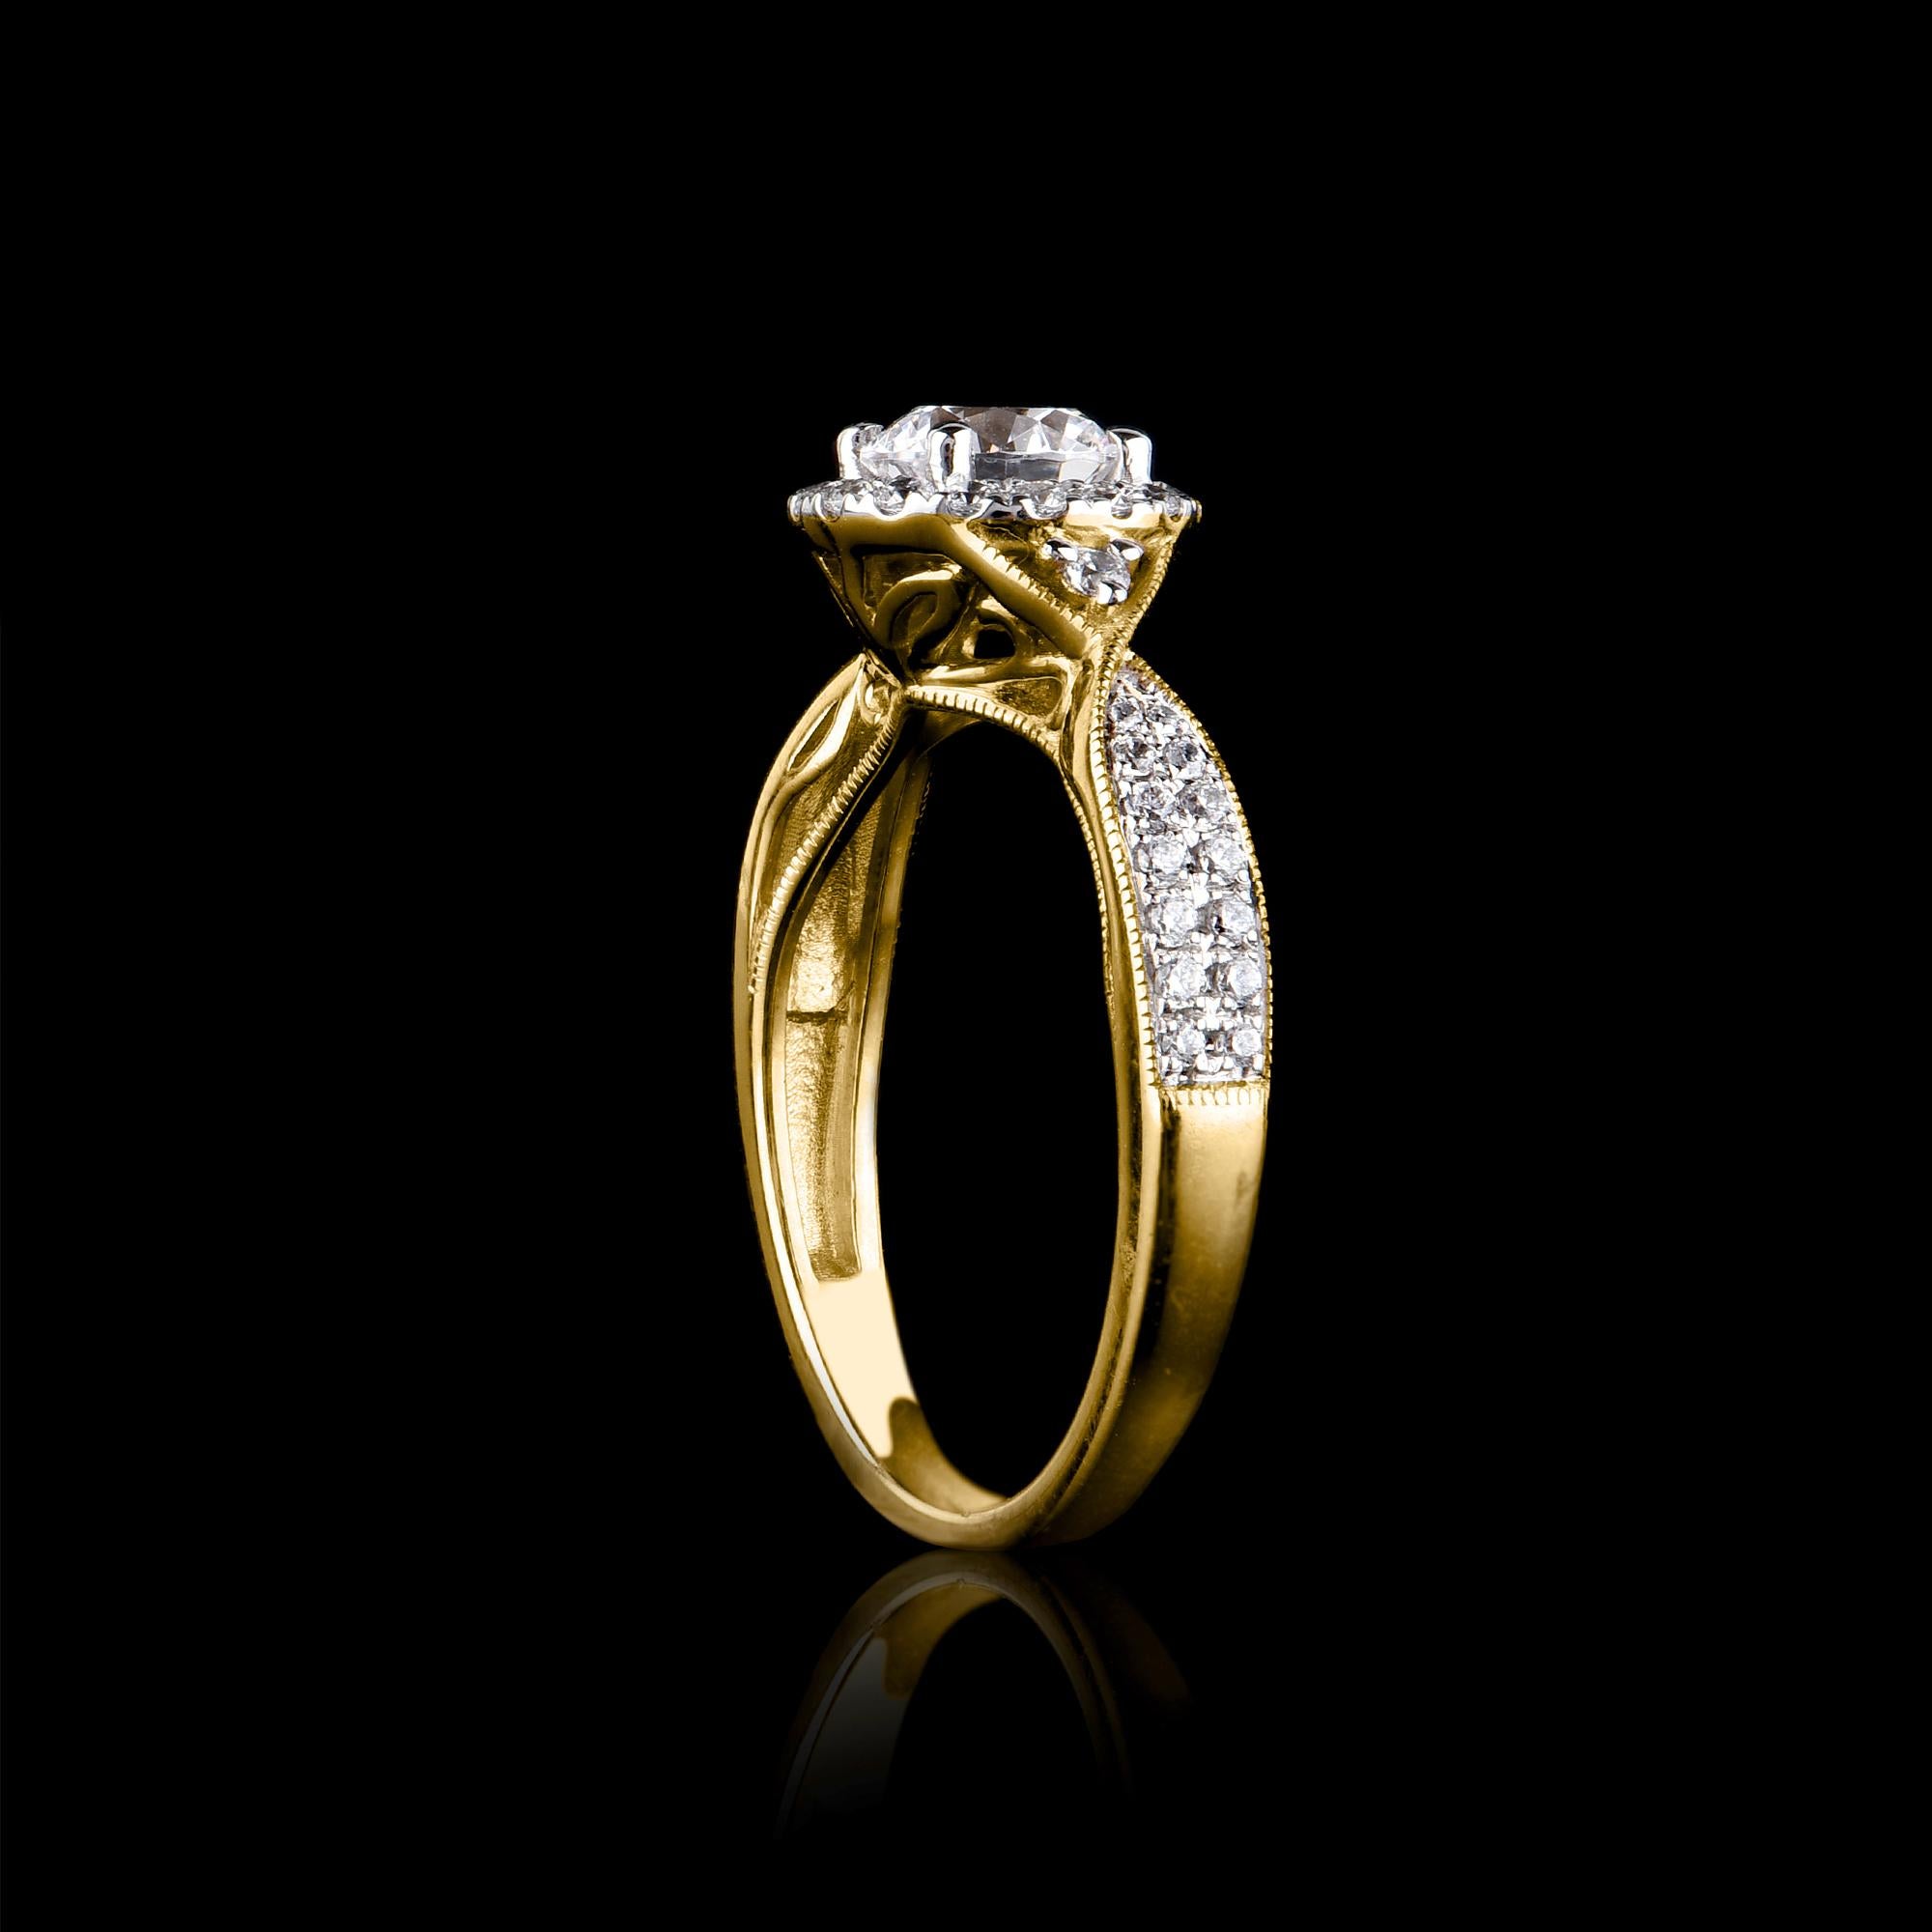 This Engagement Ring is expertly crafted in 18 Karat yellow gold and features 0.80 ct centre stone and 0.35 ct diamond frame and shank lined diamond set in micro-prong and prong setting. The diamonds are natural, not treated and dazzles in G-H color